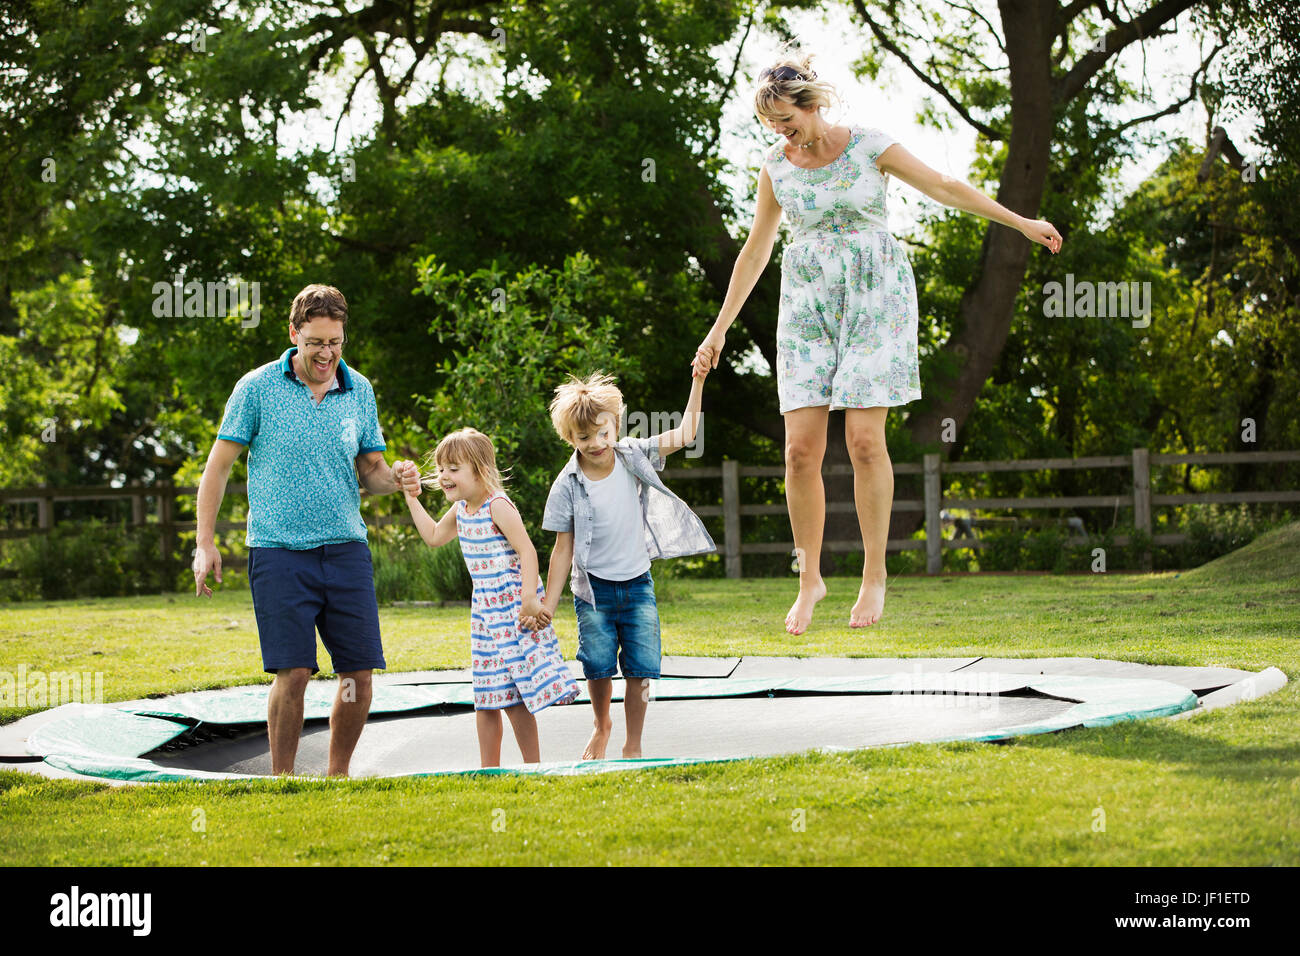 Man, woman, boy and girl holding hands, jumping on a trampoline set in the lawn in a garden. Stock Photo